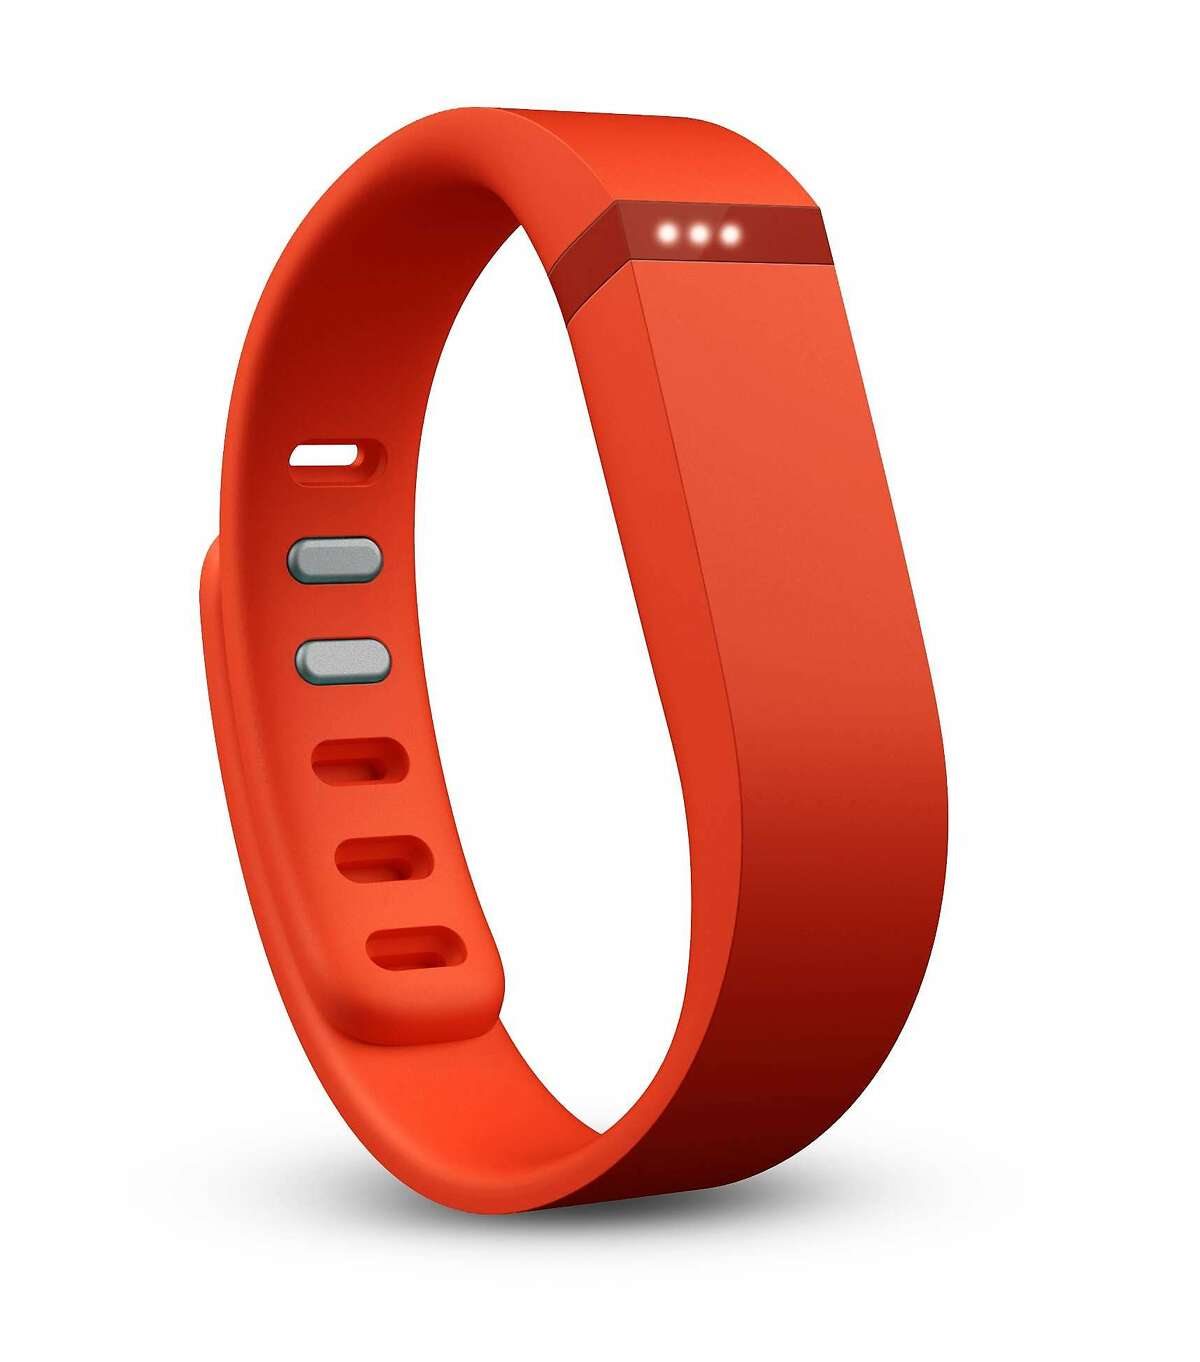 The Fitbit Flex retails for $99.95. The wristwatch device monitors your activity and sleep. The device can connects to your smartphone and computer.